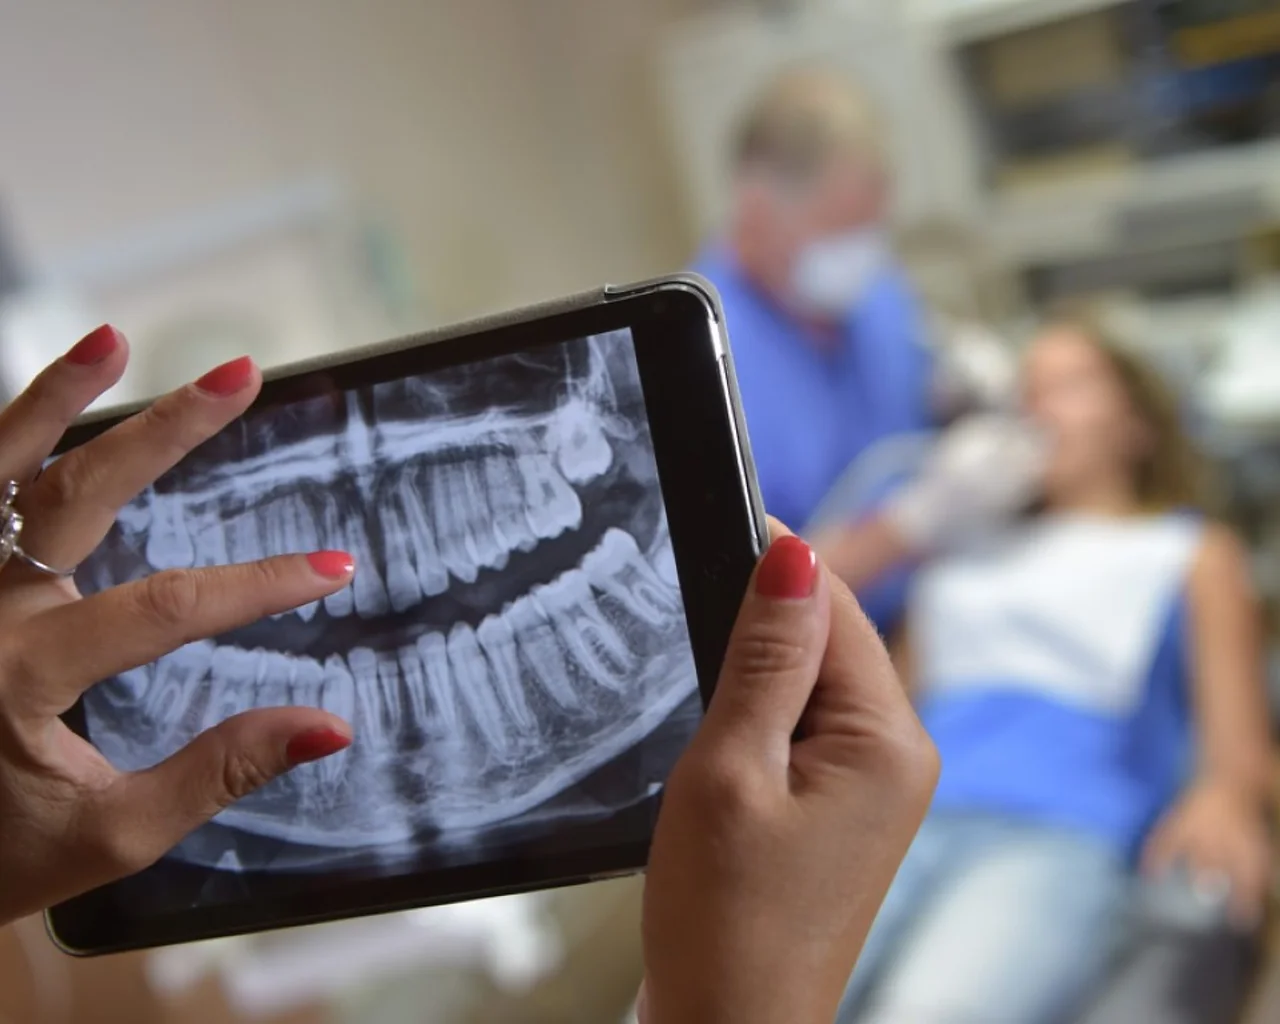 Dental X-Rays with patient in background